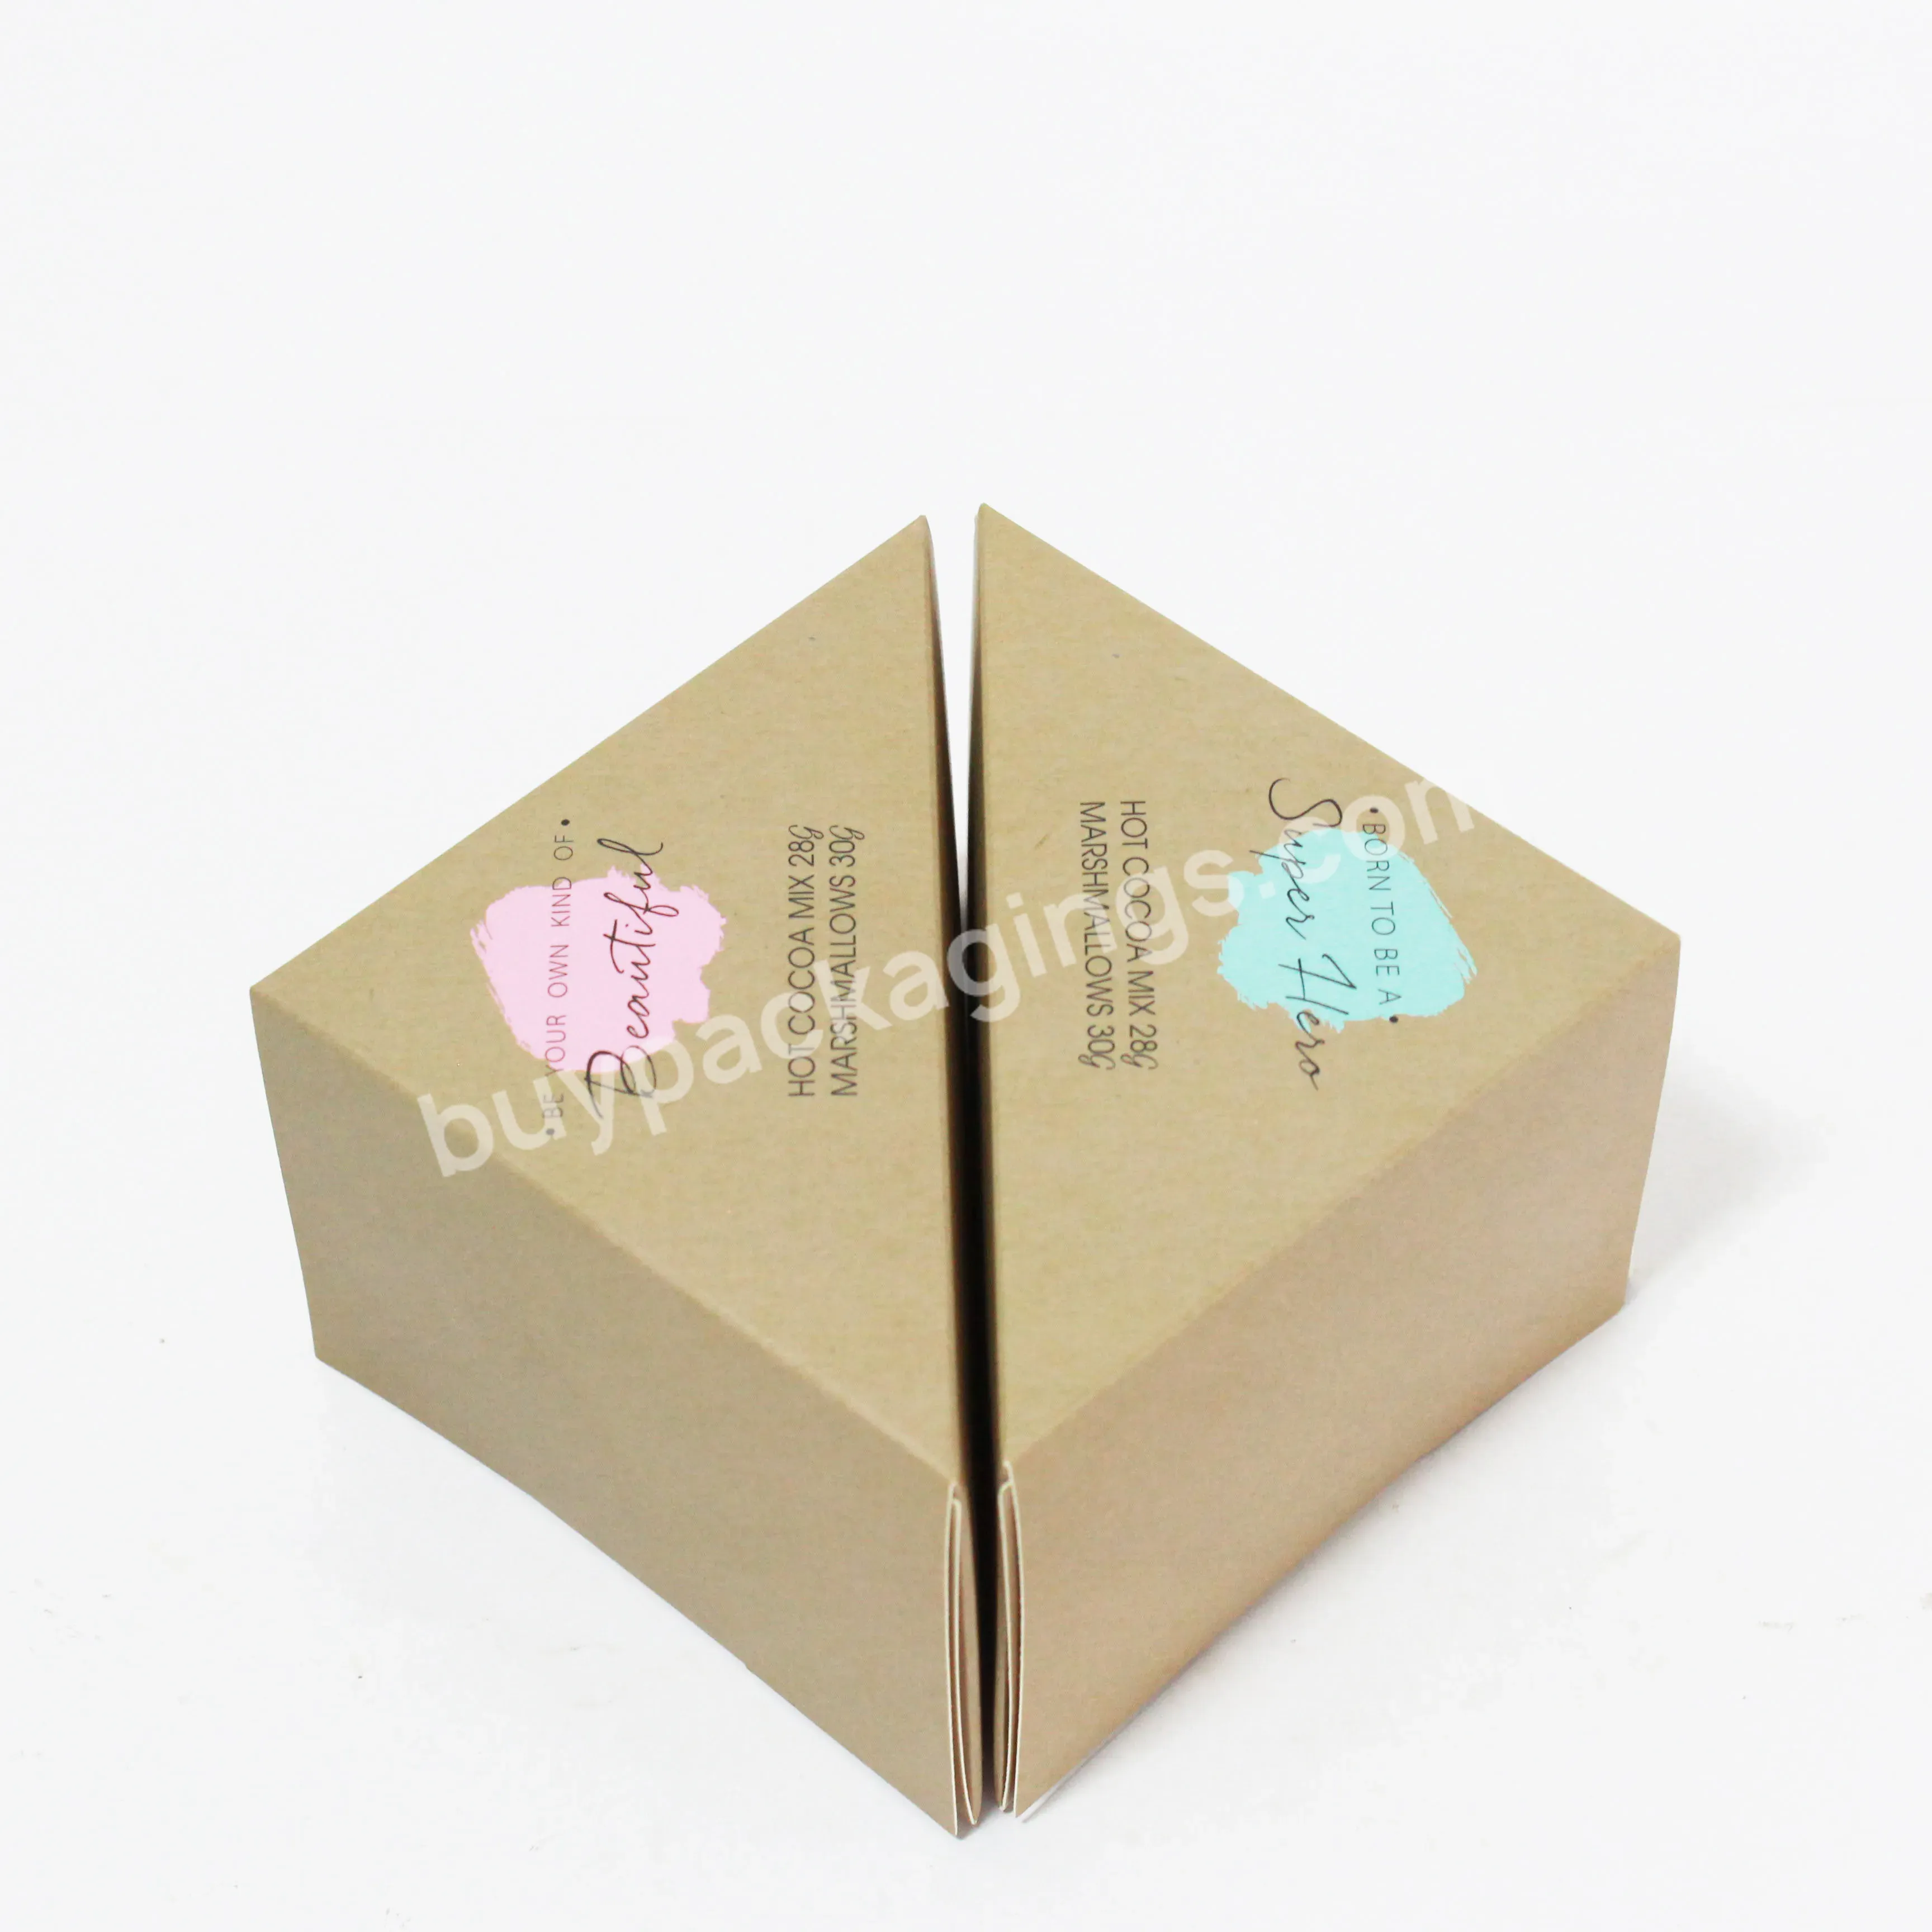 Wholesale Custom Logo Unique Sweet Paper Packaging Box Triangle Shape Cardboard Boxes Candy Boxes